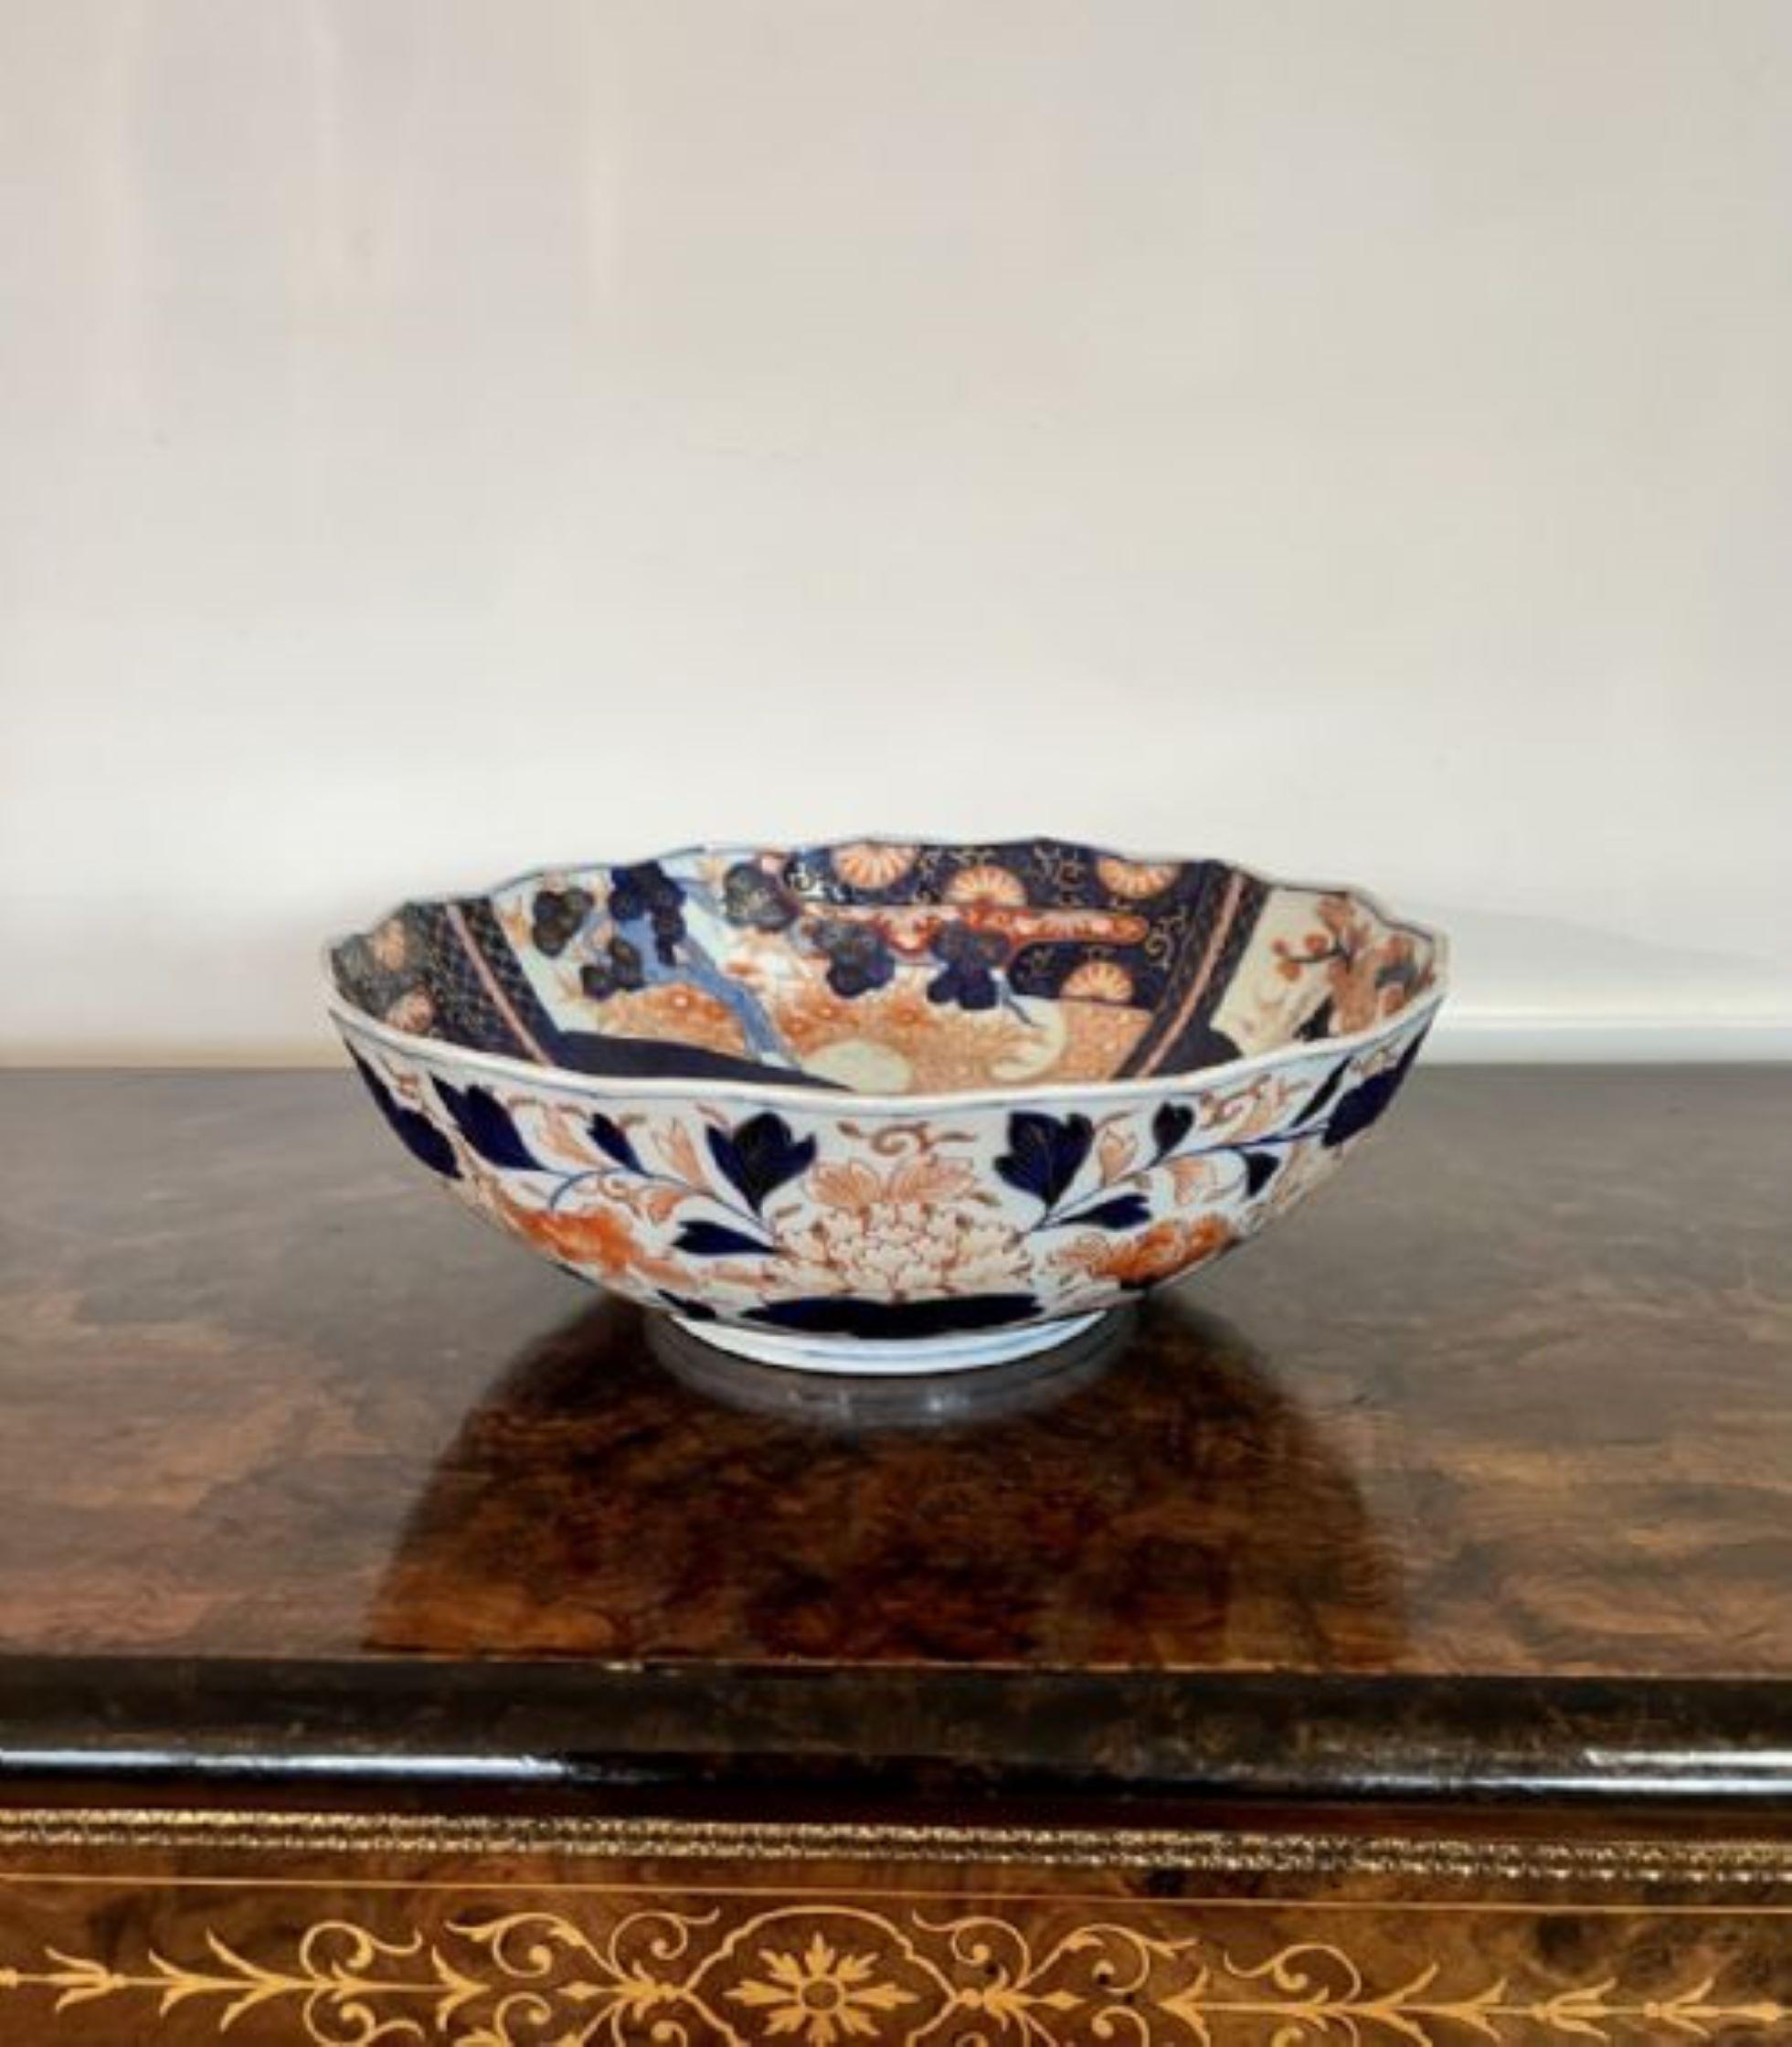 Quality antique Japanese Imari bowl having a scalloped shape edge with wonderful hand painted panels decorated with flowers and leaves in fantastic red, blue white and gold colours.